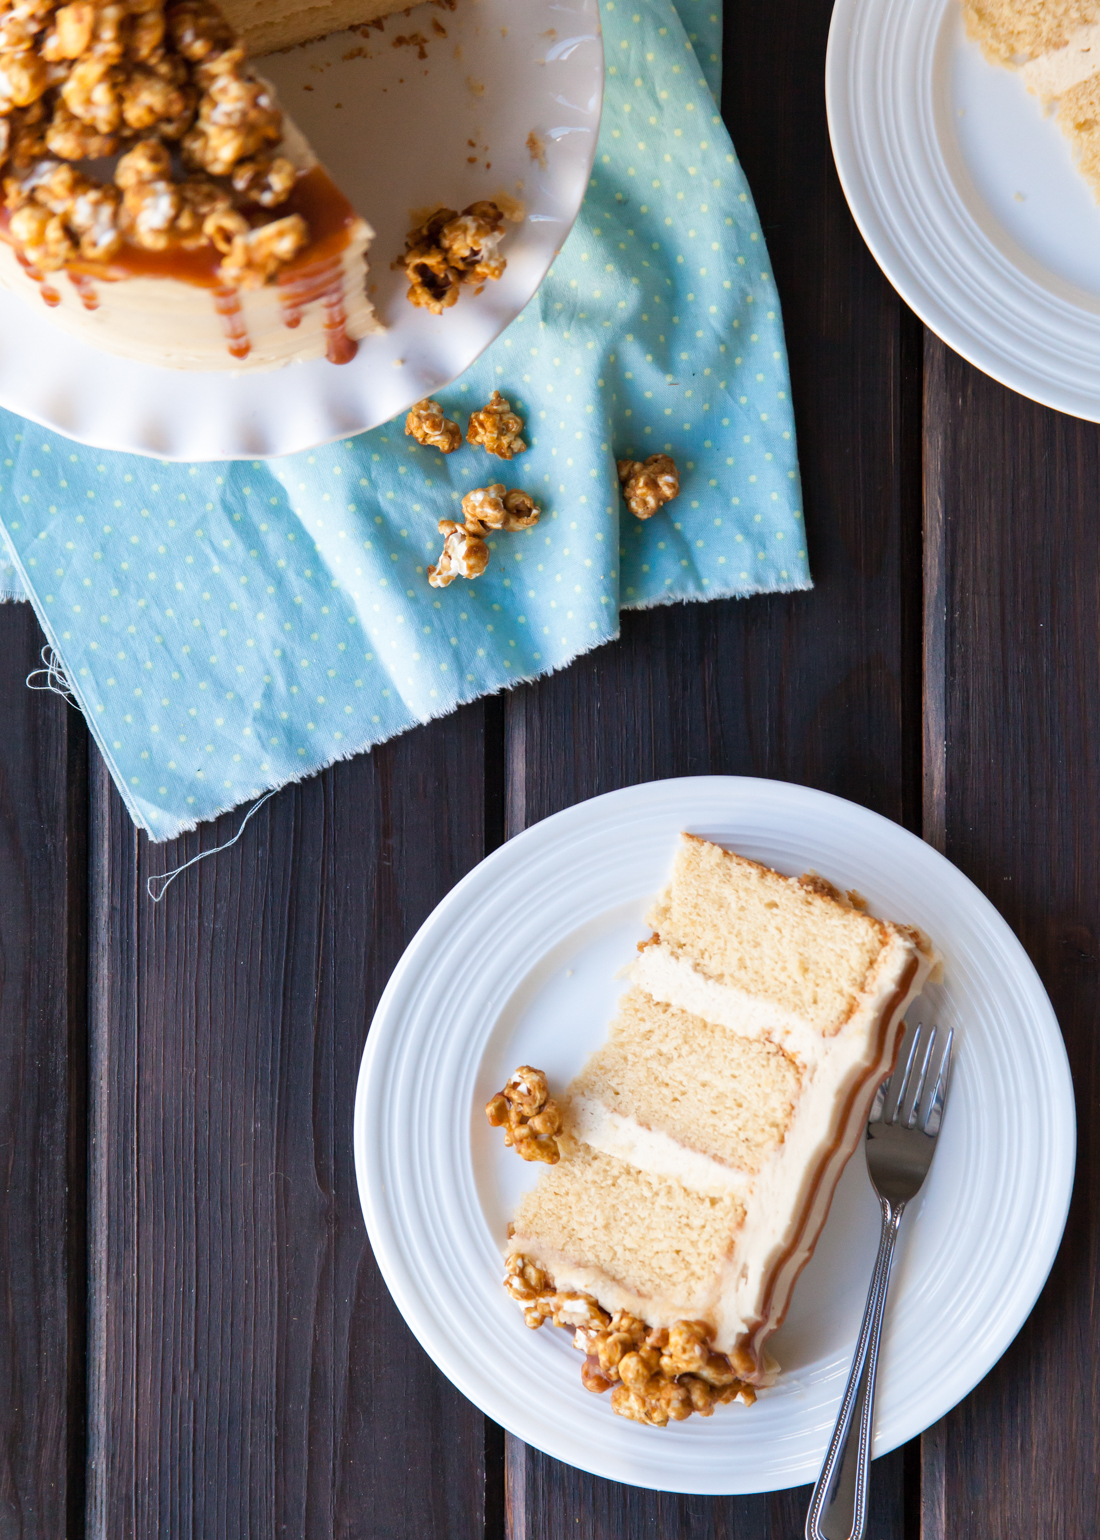 Caramel Popcorn Cake Recipe with brown butter cake and peanut butter frosting.